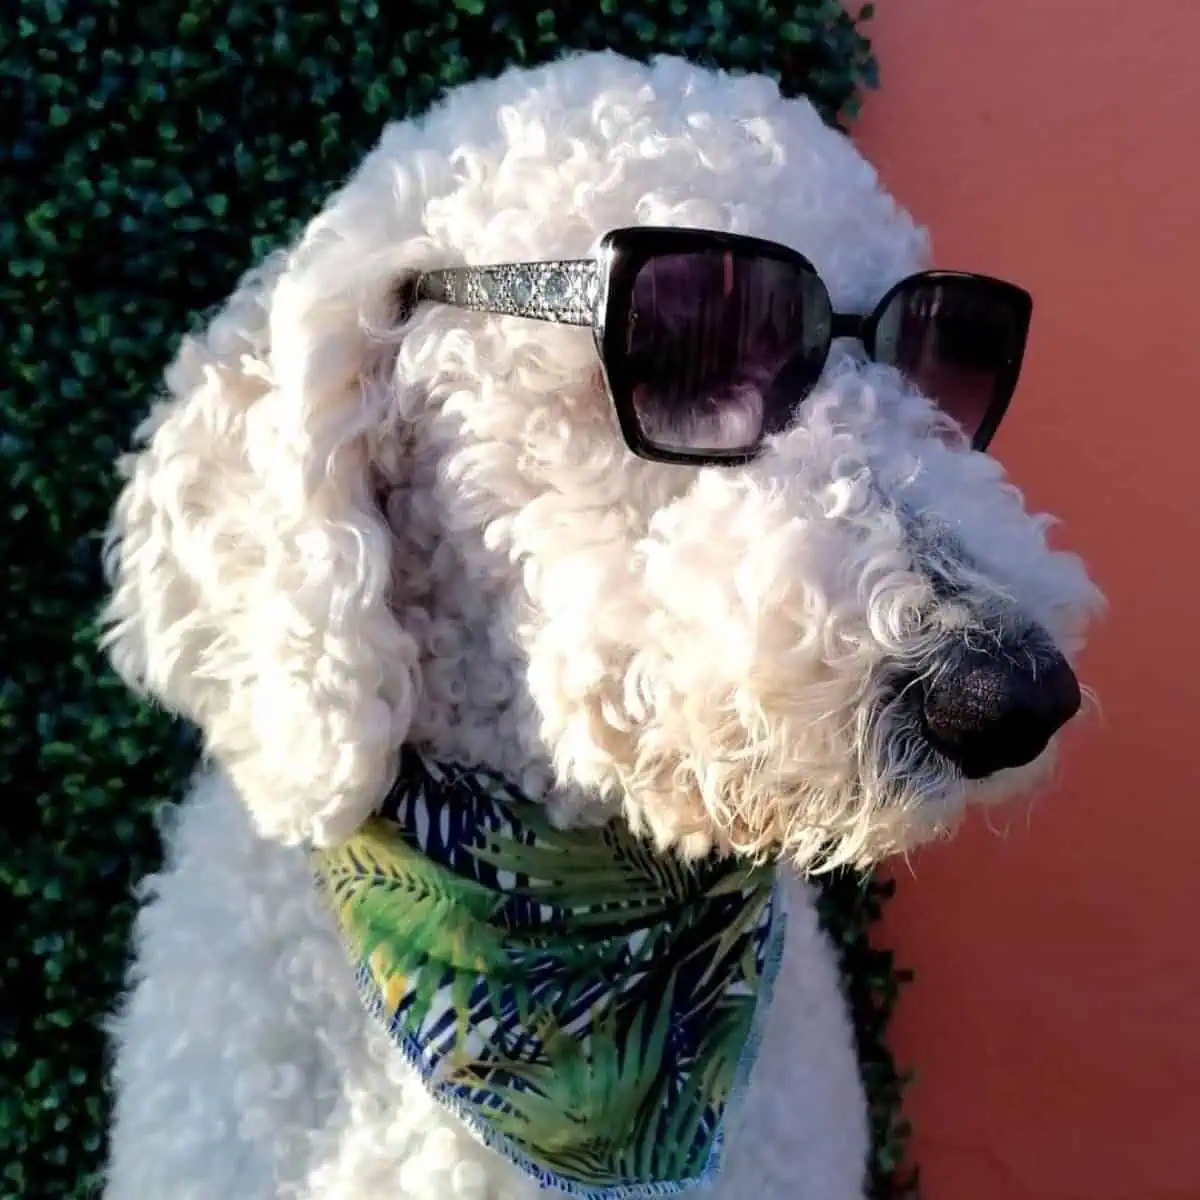 Poodle wearing sunglasses